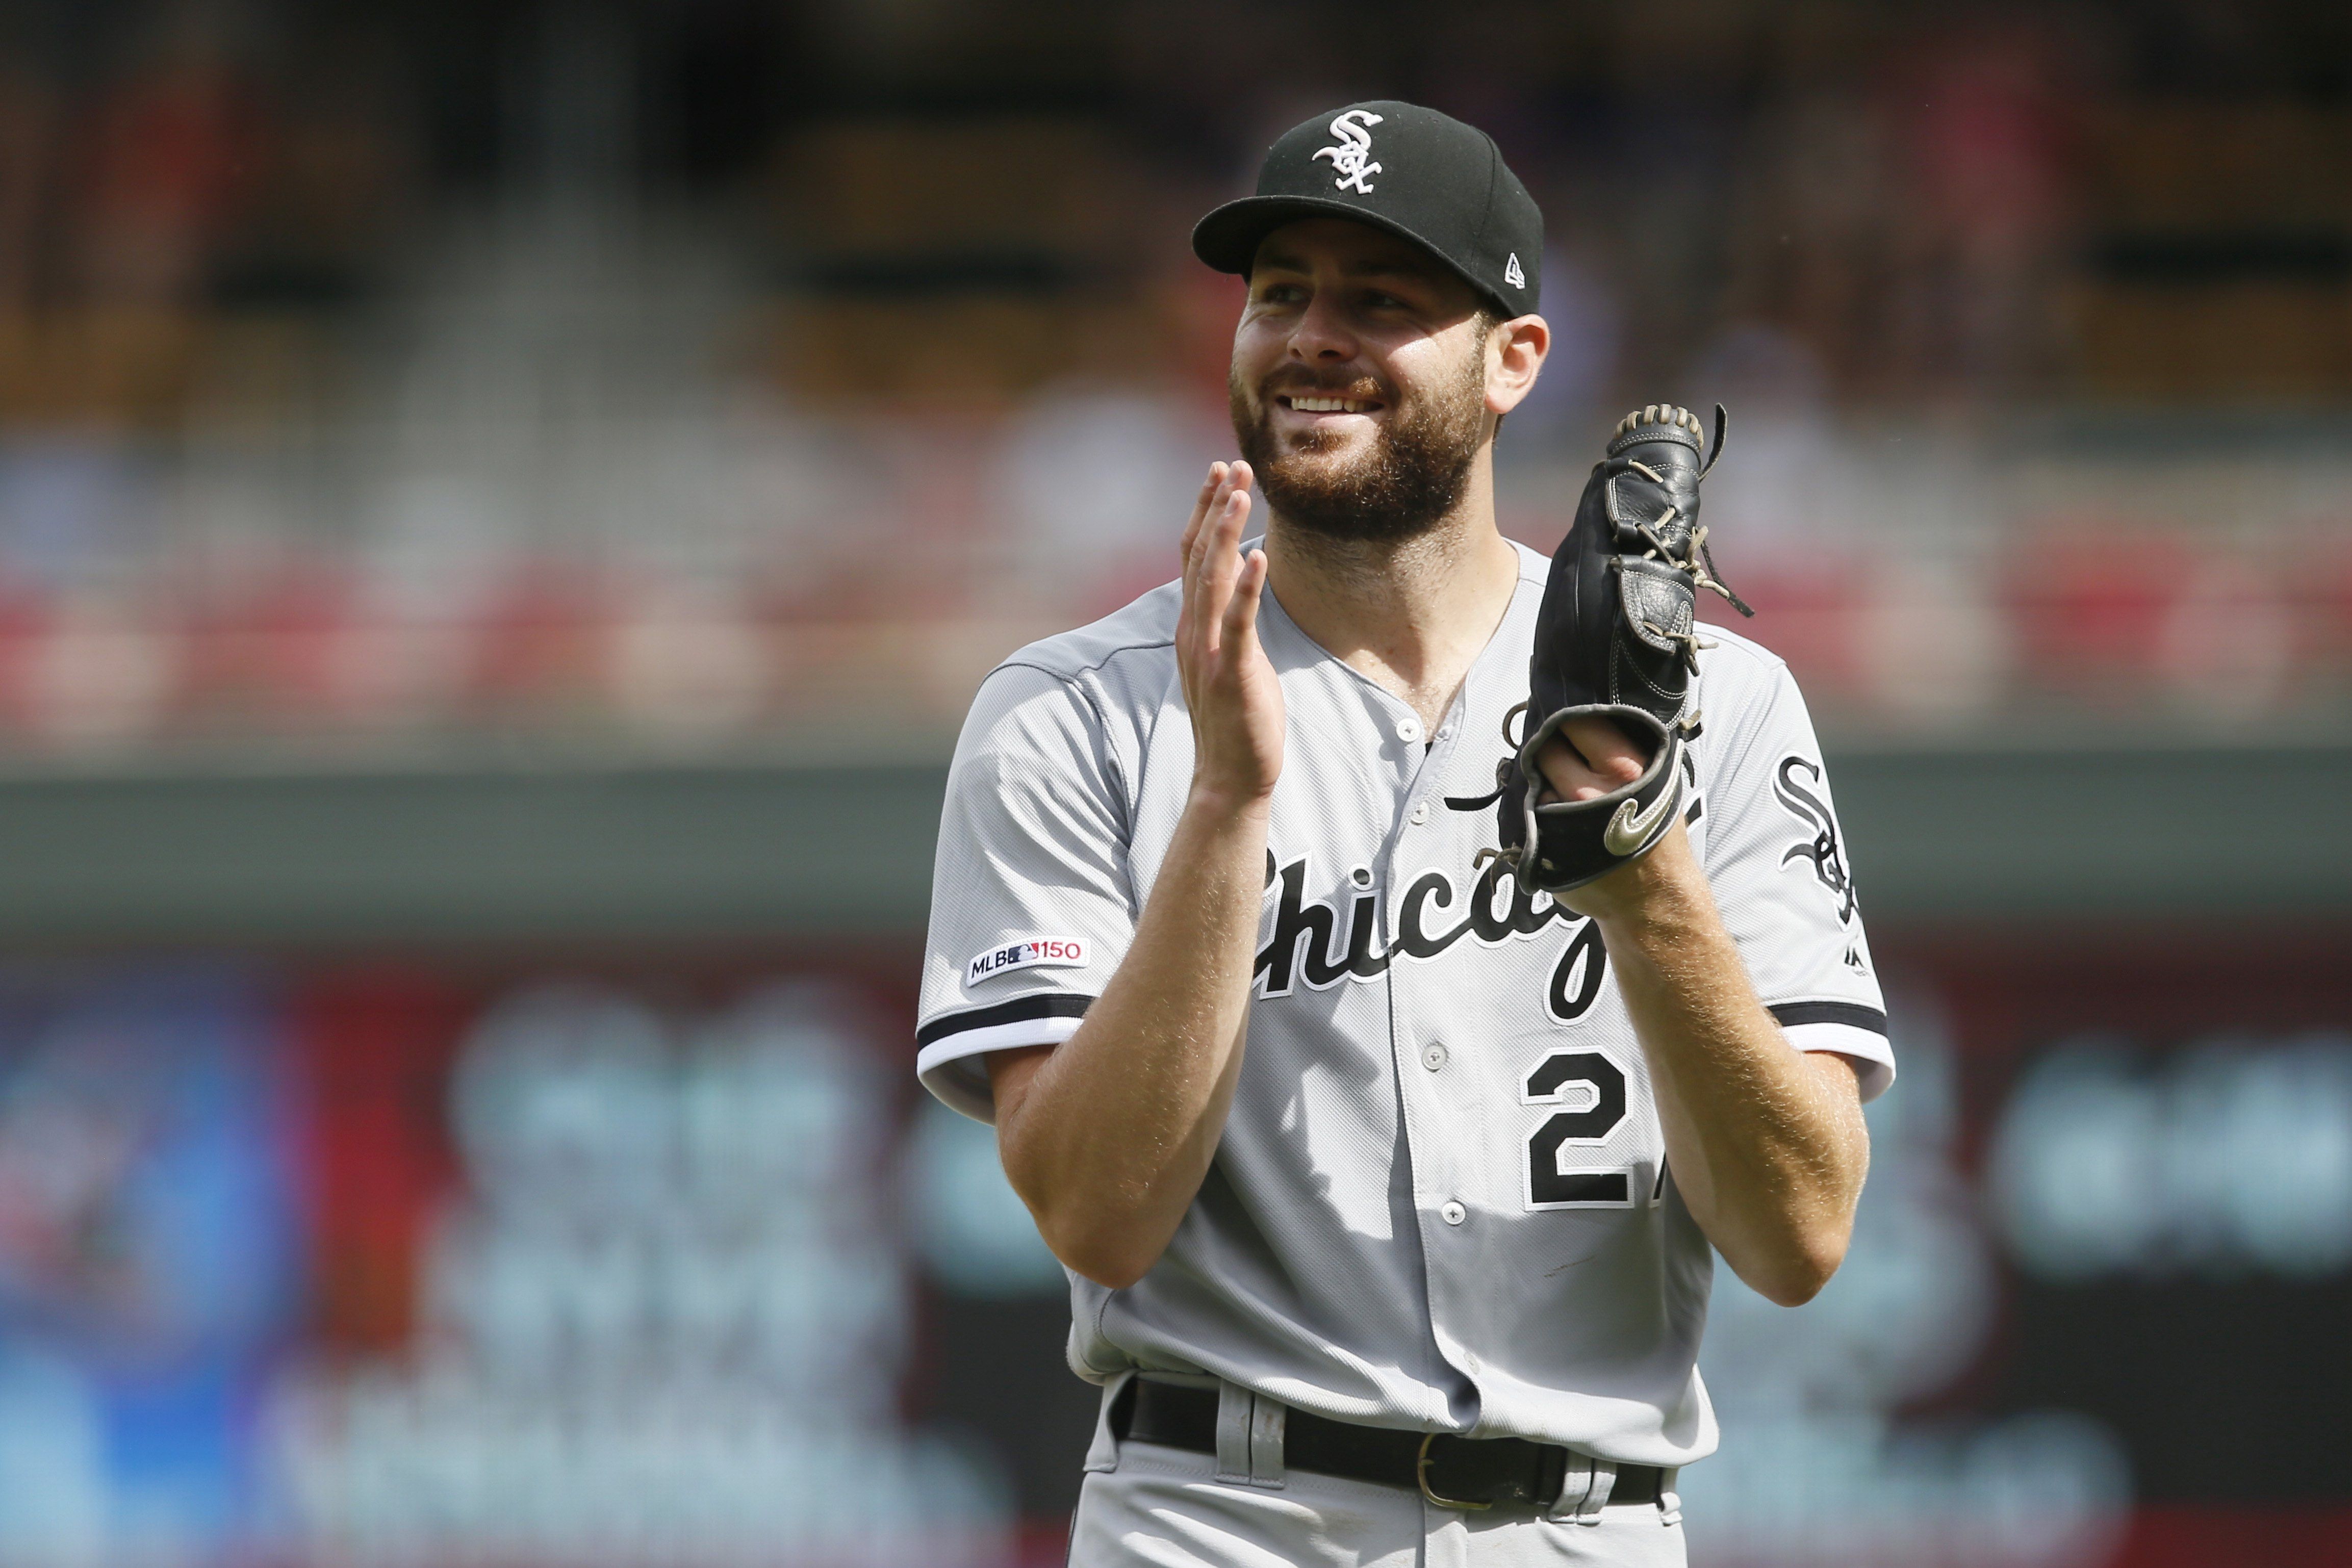 Giolito's 3-hit shutout gives White Sox 4-0 win over Twins